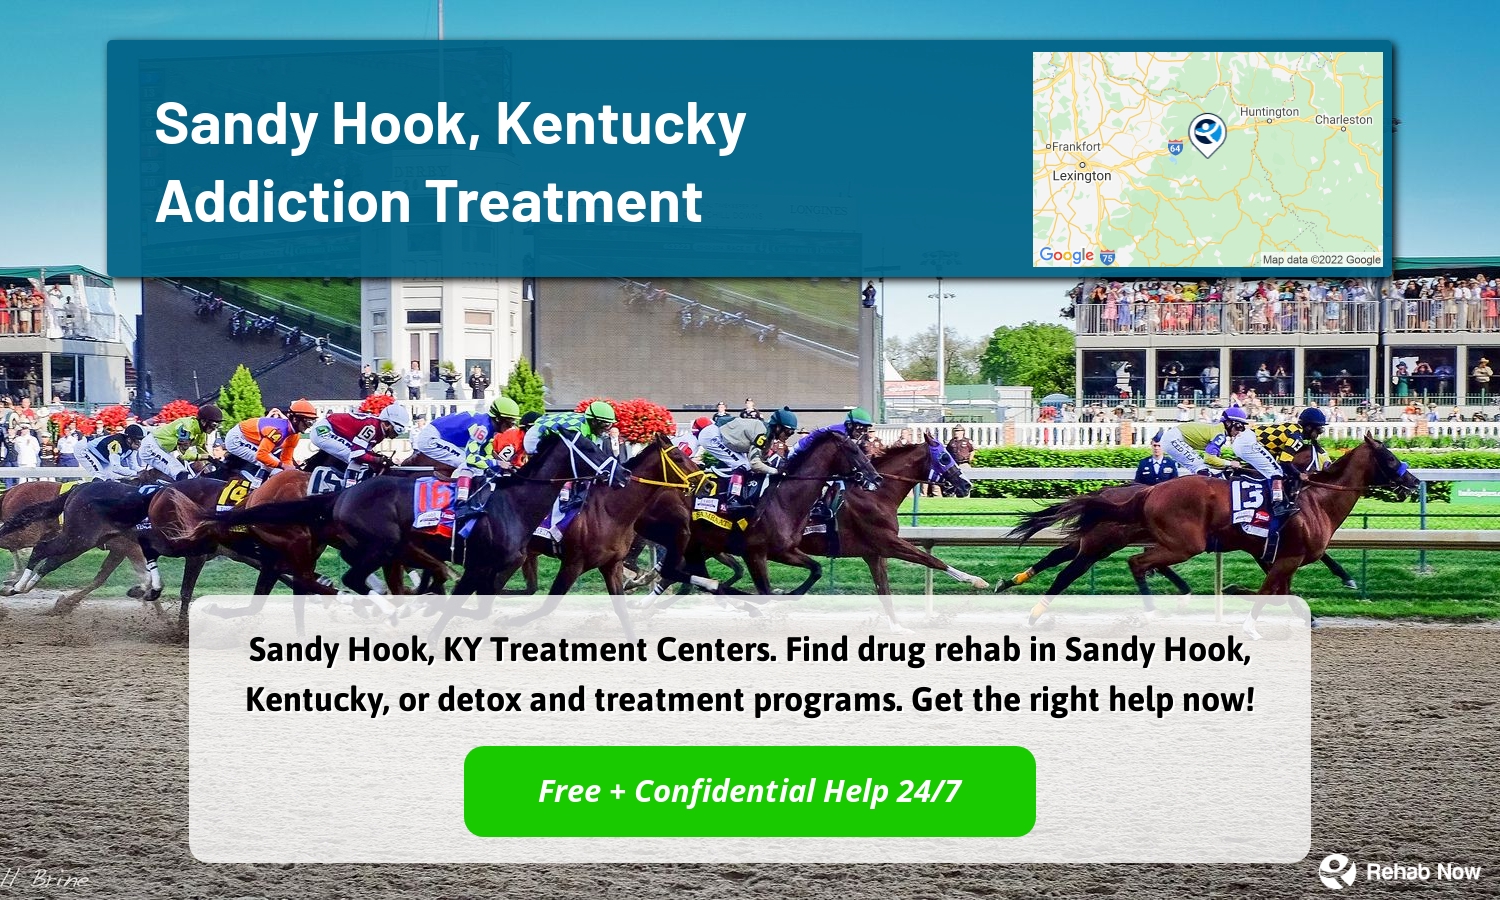 Sandy Hook, KY Treatment Centers. Find drug rehab in Sandy Hook, Kentucky, or detox and treatment programs. Get the right help now!